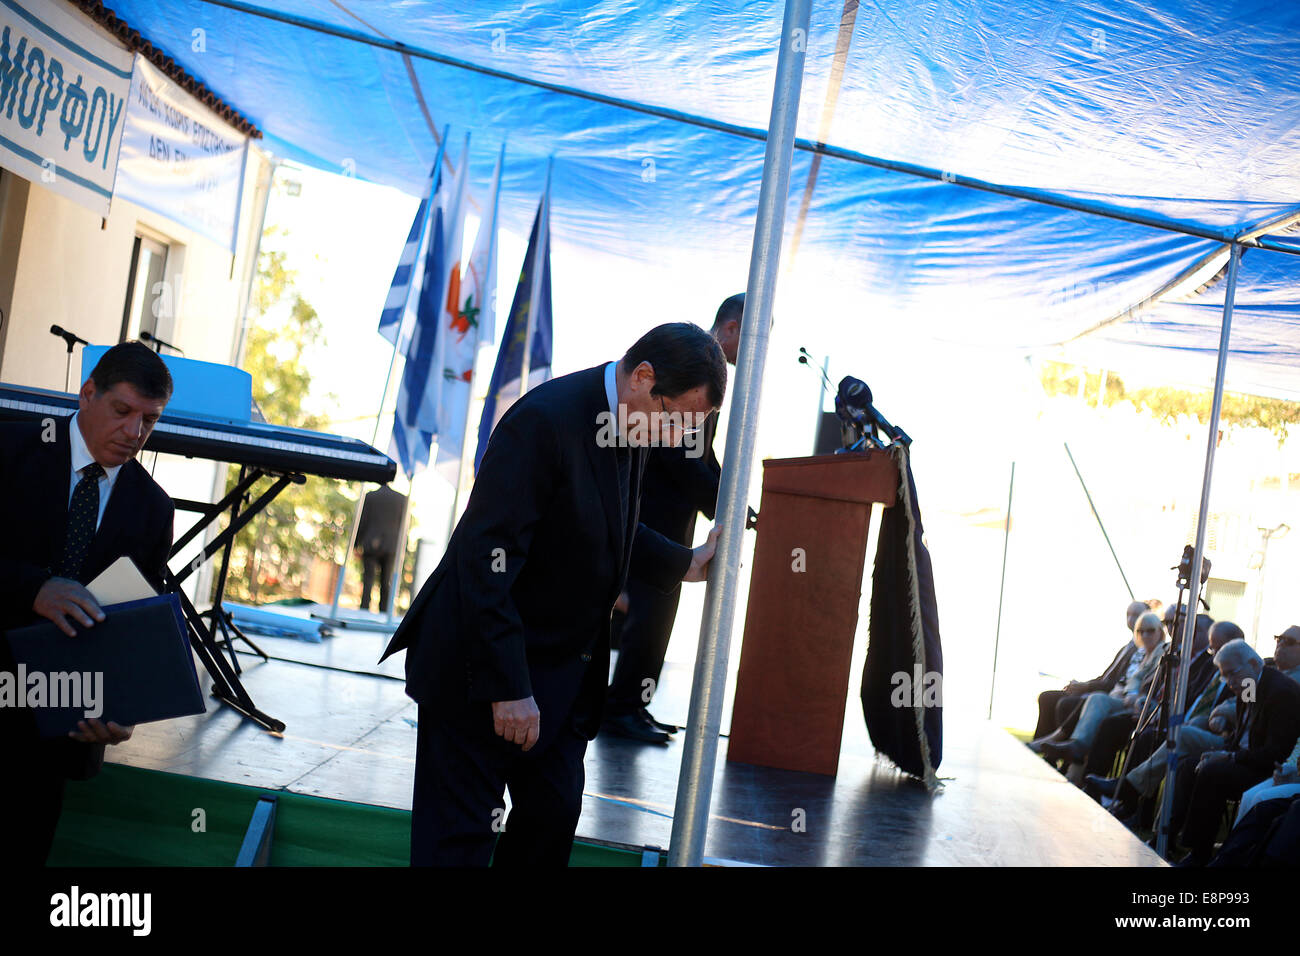 Astromeritis, Cyprus. 12th Oct, 2014. President of Cyprus Nicos Anastasiadis descends from the stage after his speech during the anti-occupation event of Morfou municipality in Astromeritys Village. The anti-occupation commemoration yearly was held in Morfou municipality after its Turkish invasion in 1974. Credit:  Yiorgos Doukanaris/Pacific Press/Alamy Live News Stock Photo